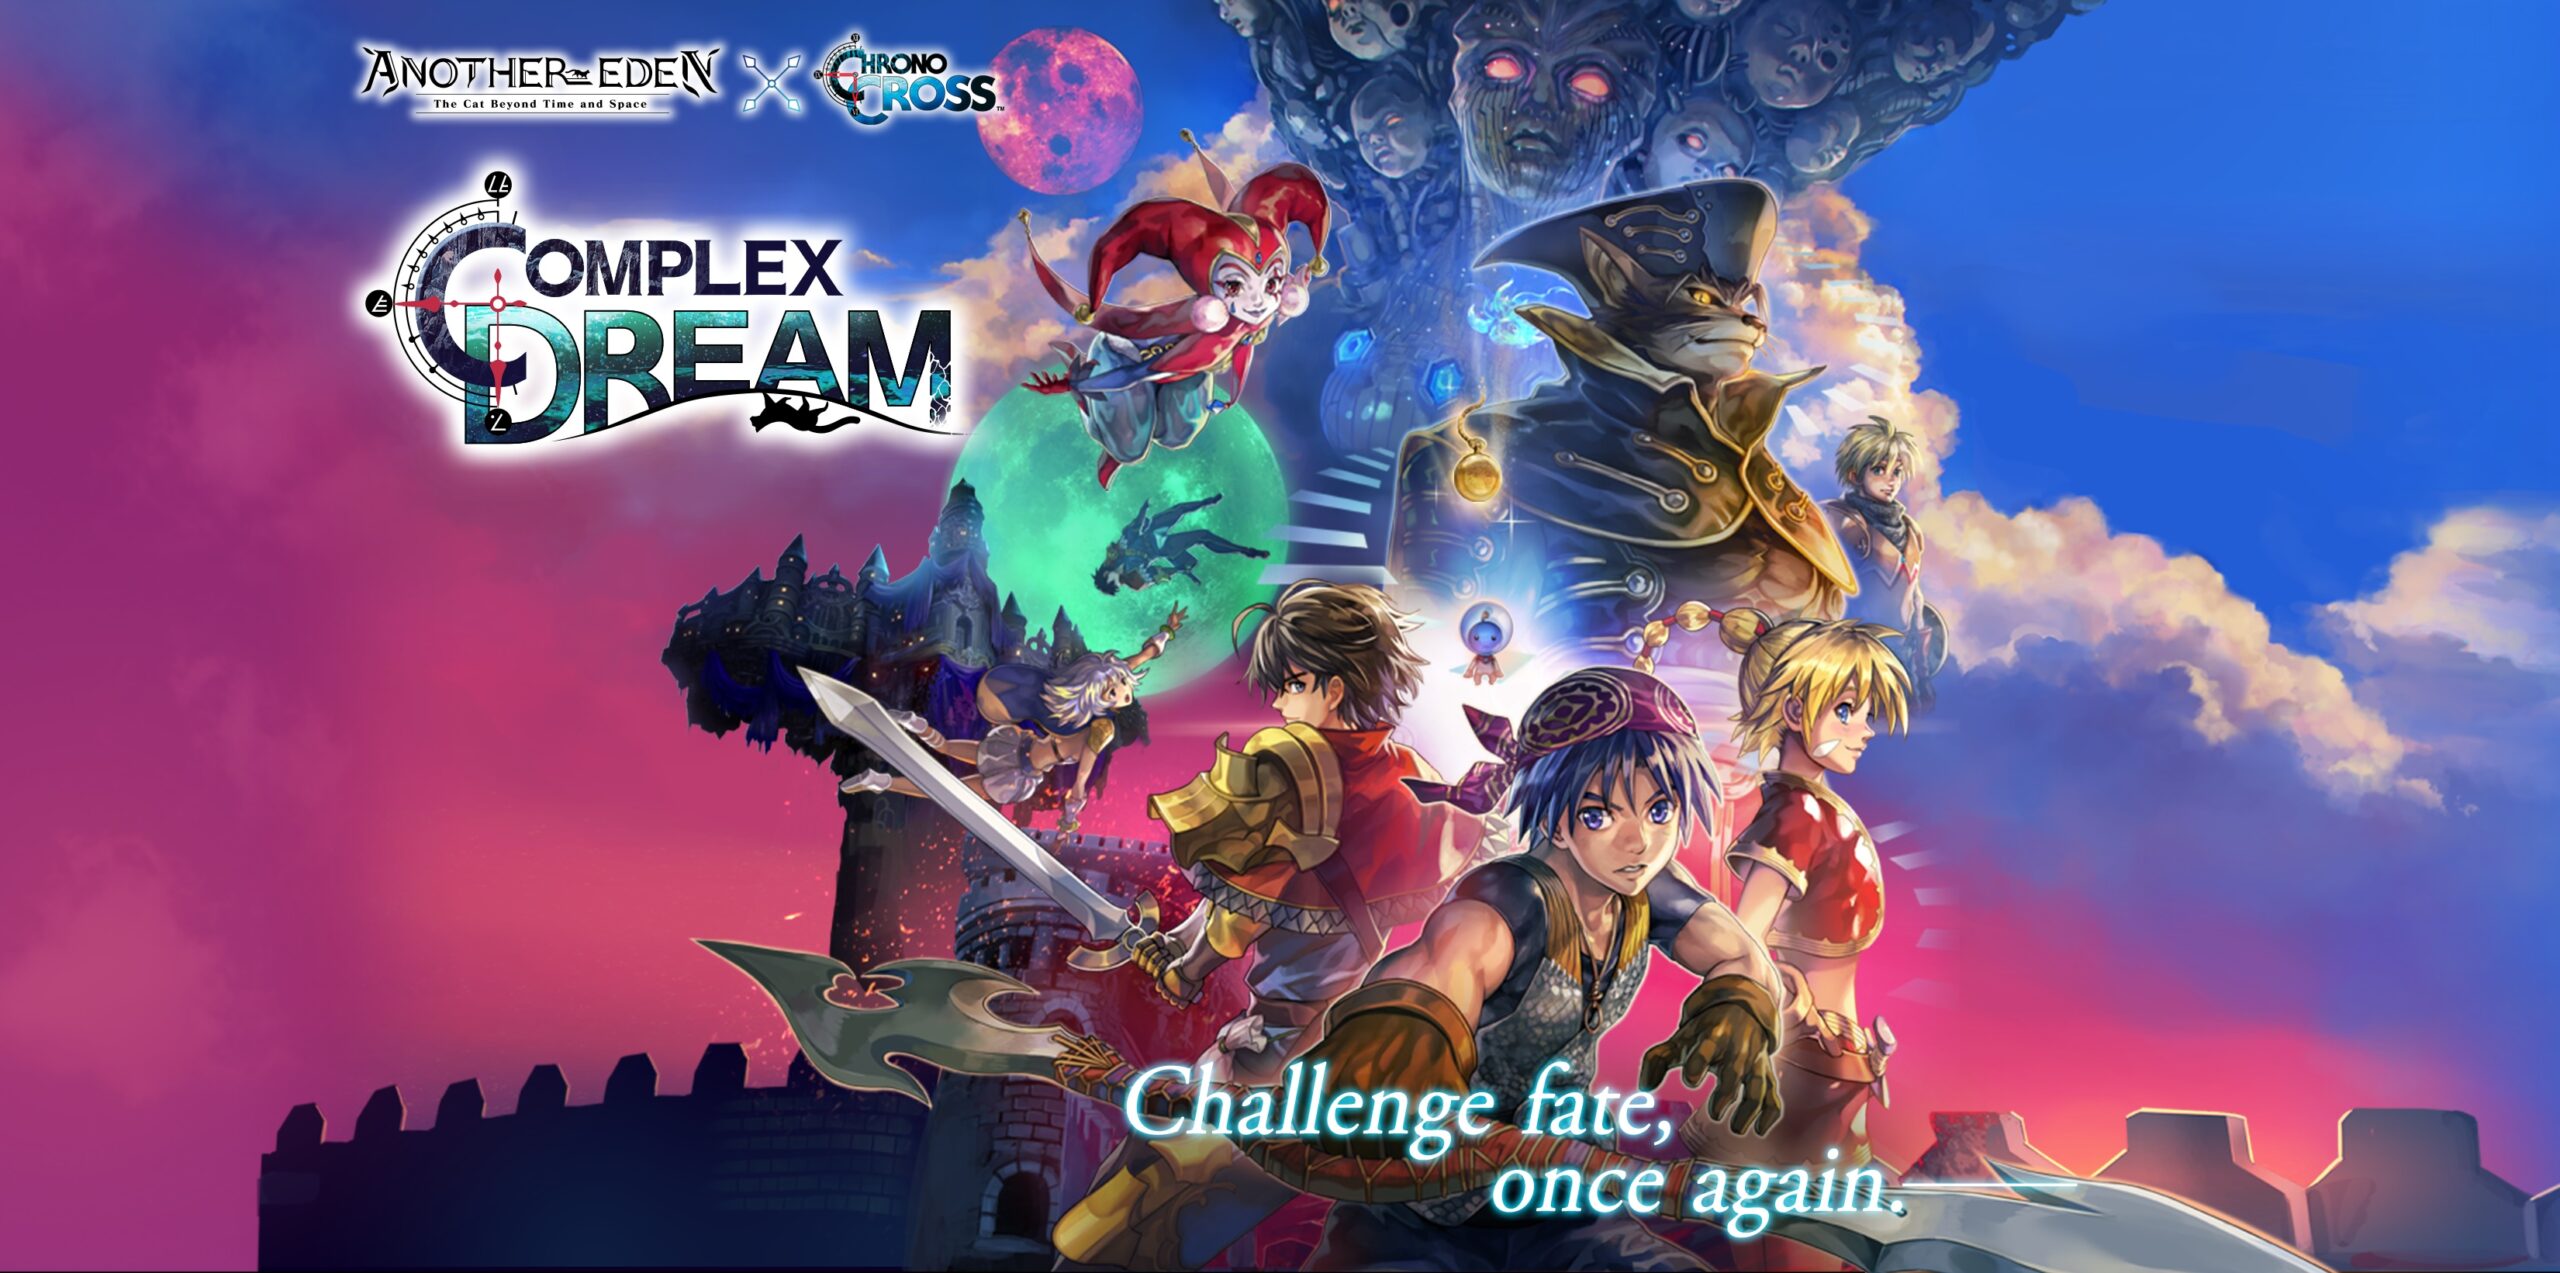 Another Eden x Chrono Cross Collaboration Begins on December 9